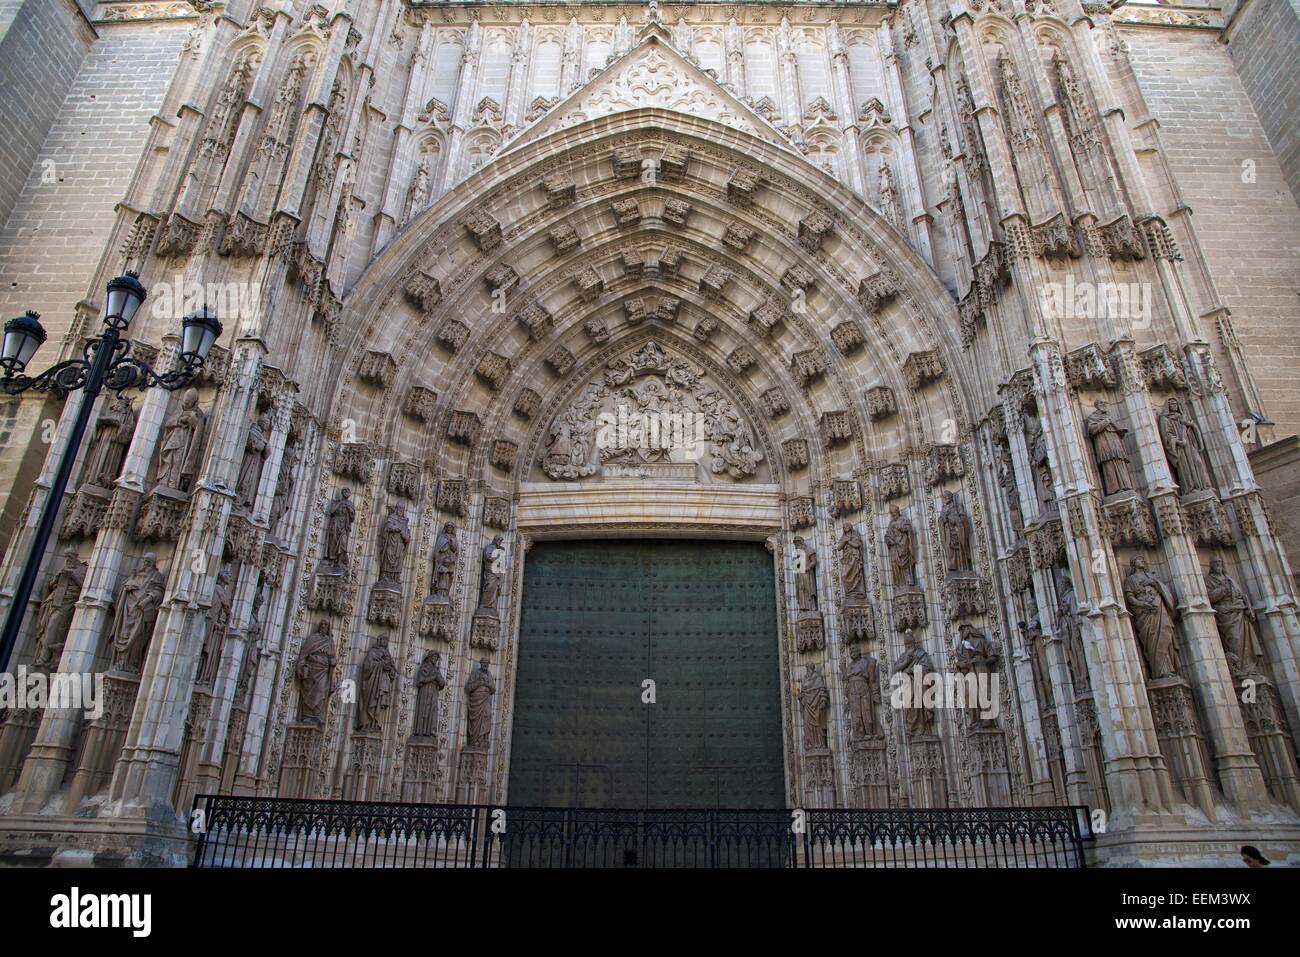 Entrance portal of the cathedral, Seville, Andalucía, Spain Stock Photo